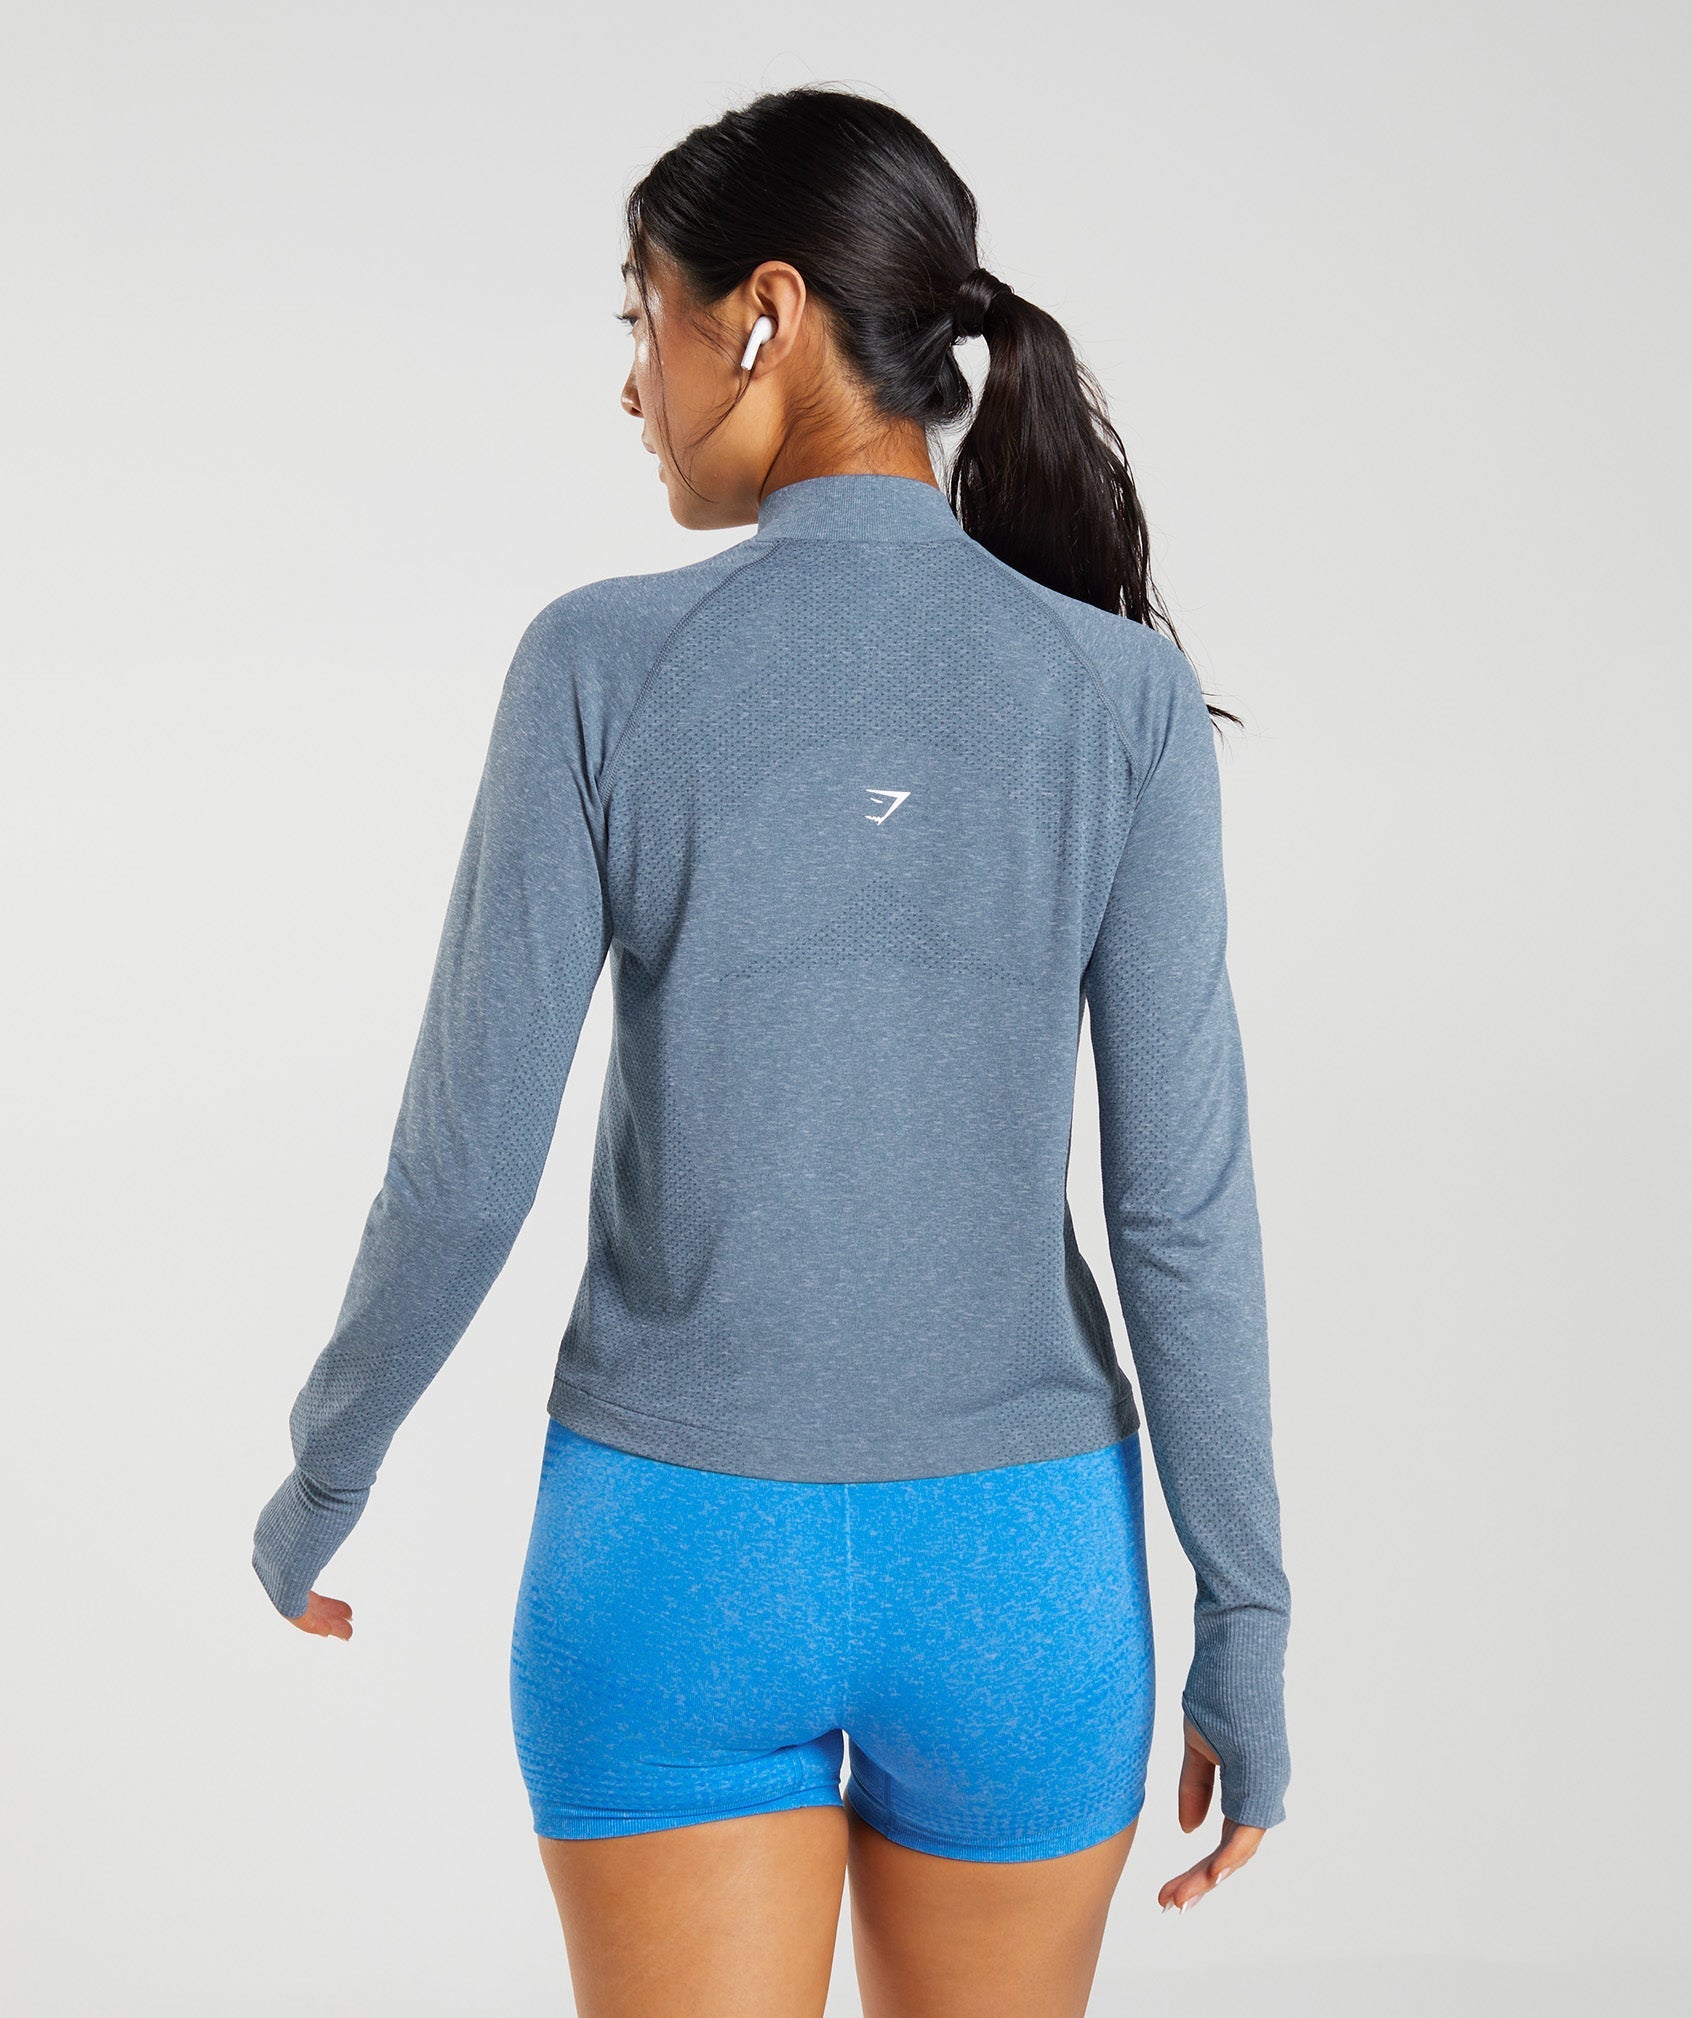 Vital Seamless 2.0 1/4 Track Top in Evening Blue Marl